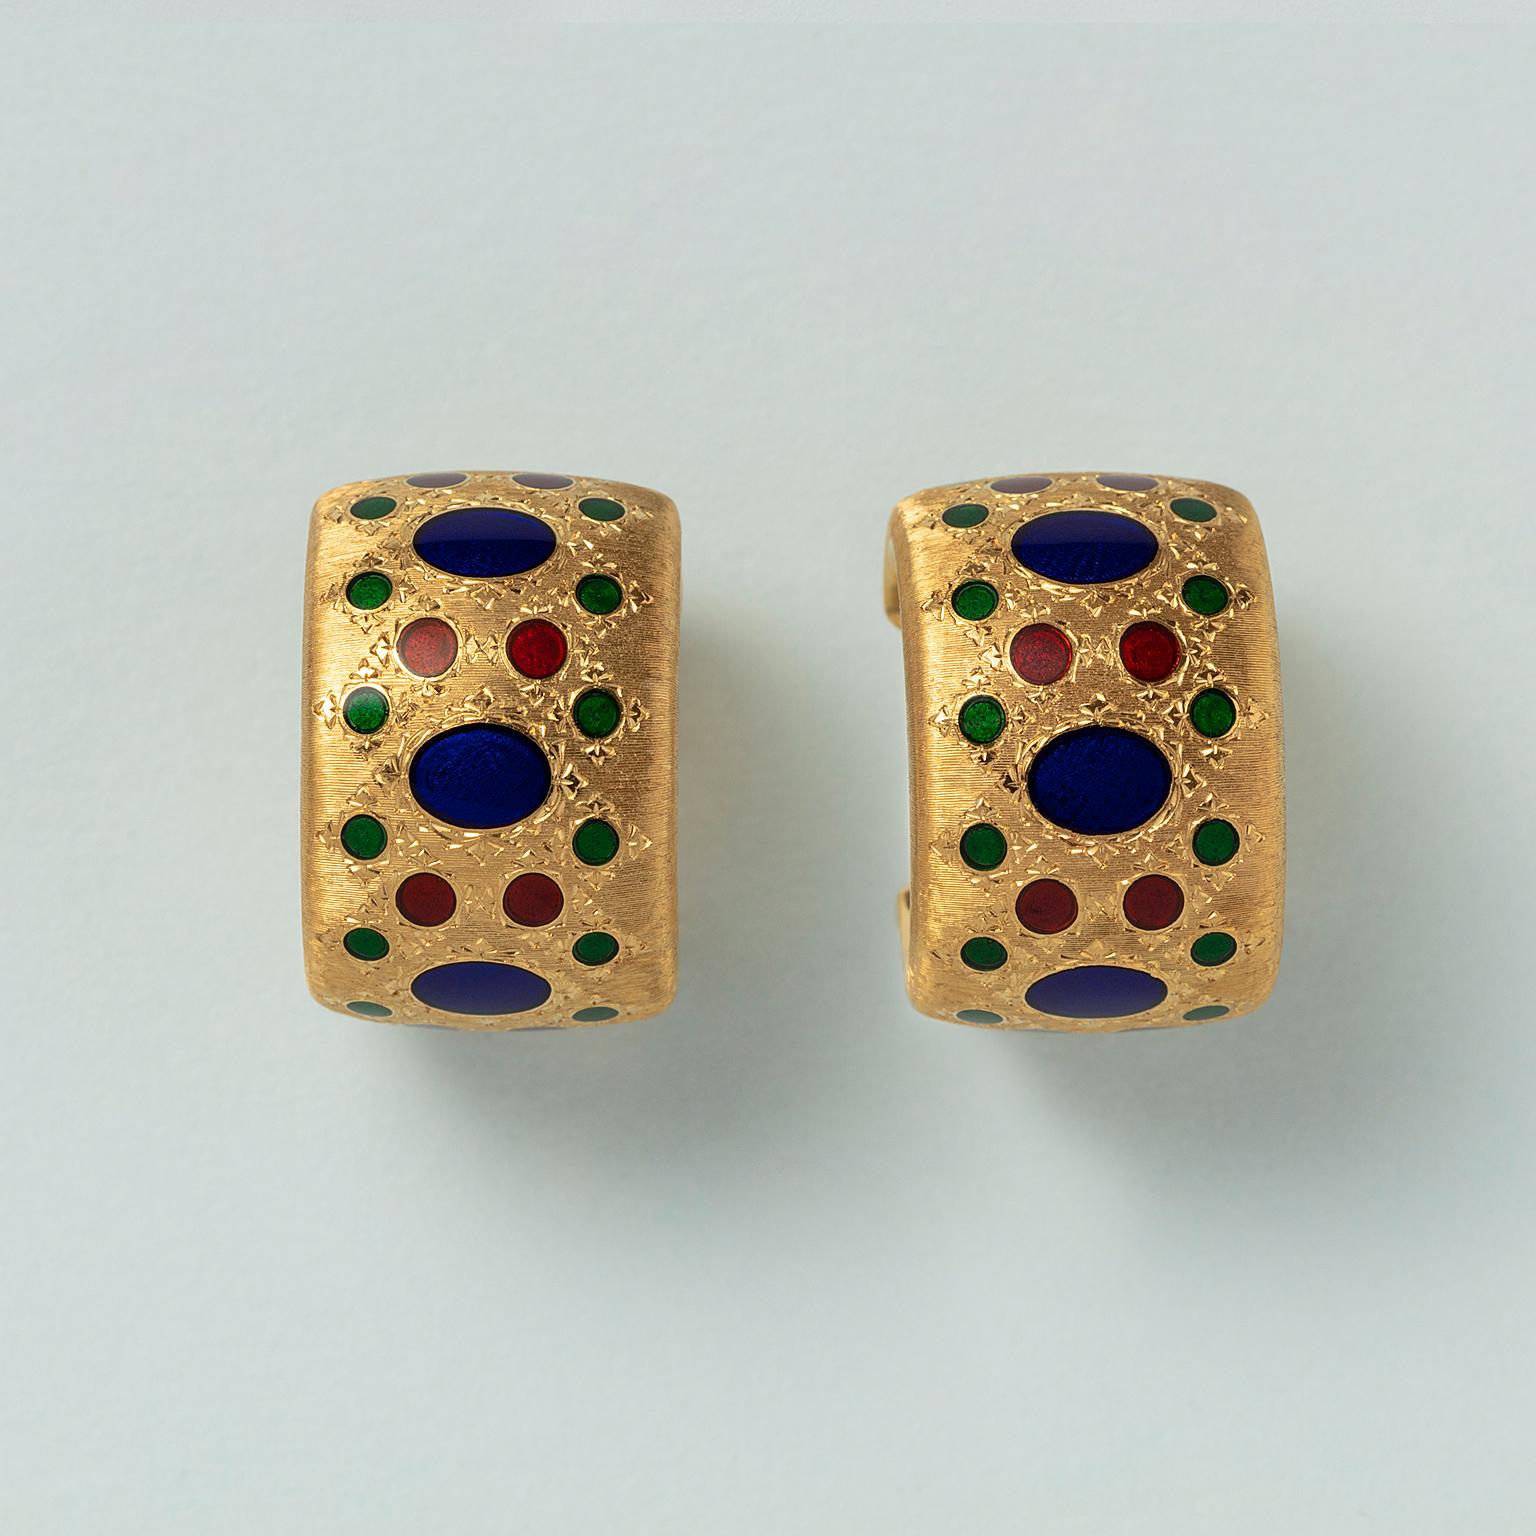 A pair of 18 carat yellow gold ear clips decorated blue, green and red enameled dots and engravings, signed and numbered, Buccellati, Italy X4602, circa 1965.

weight: 26.02 g
dimensions: 14 x 1 mm x 20 mm